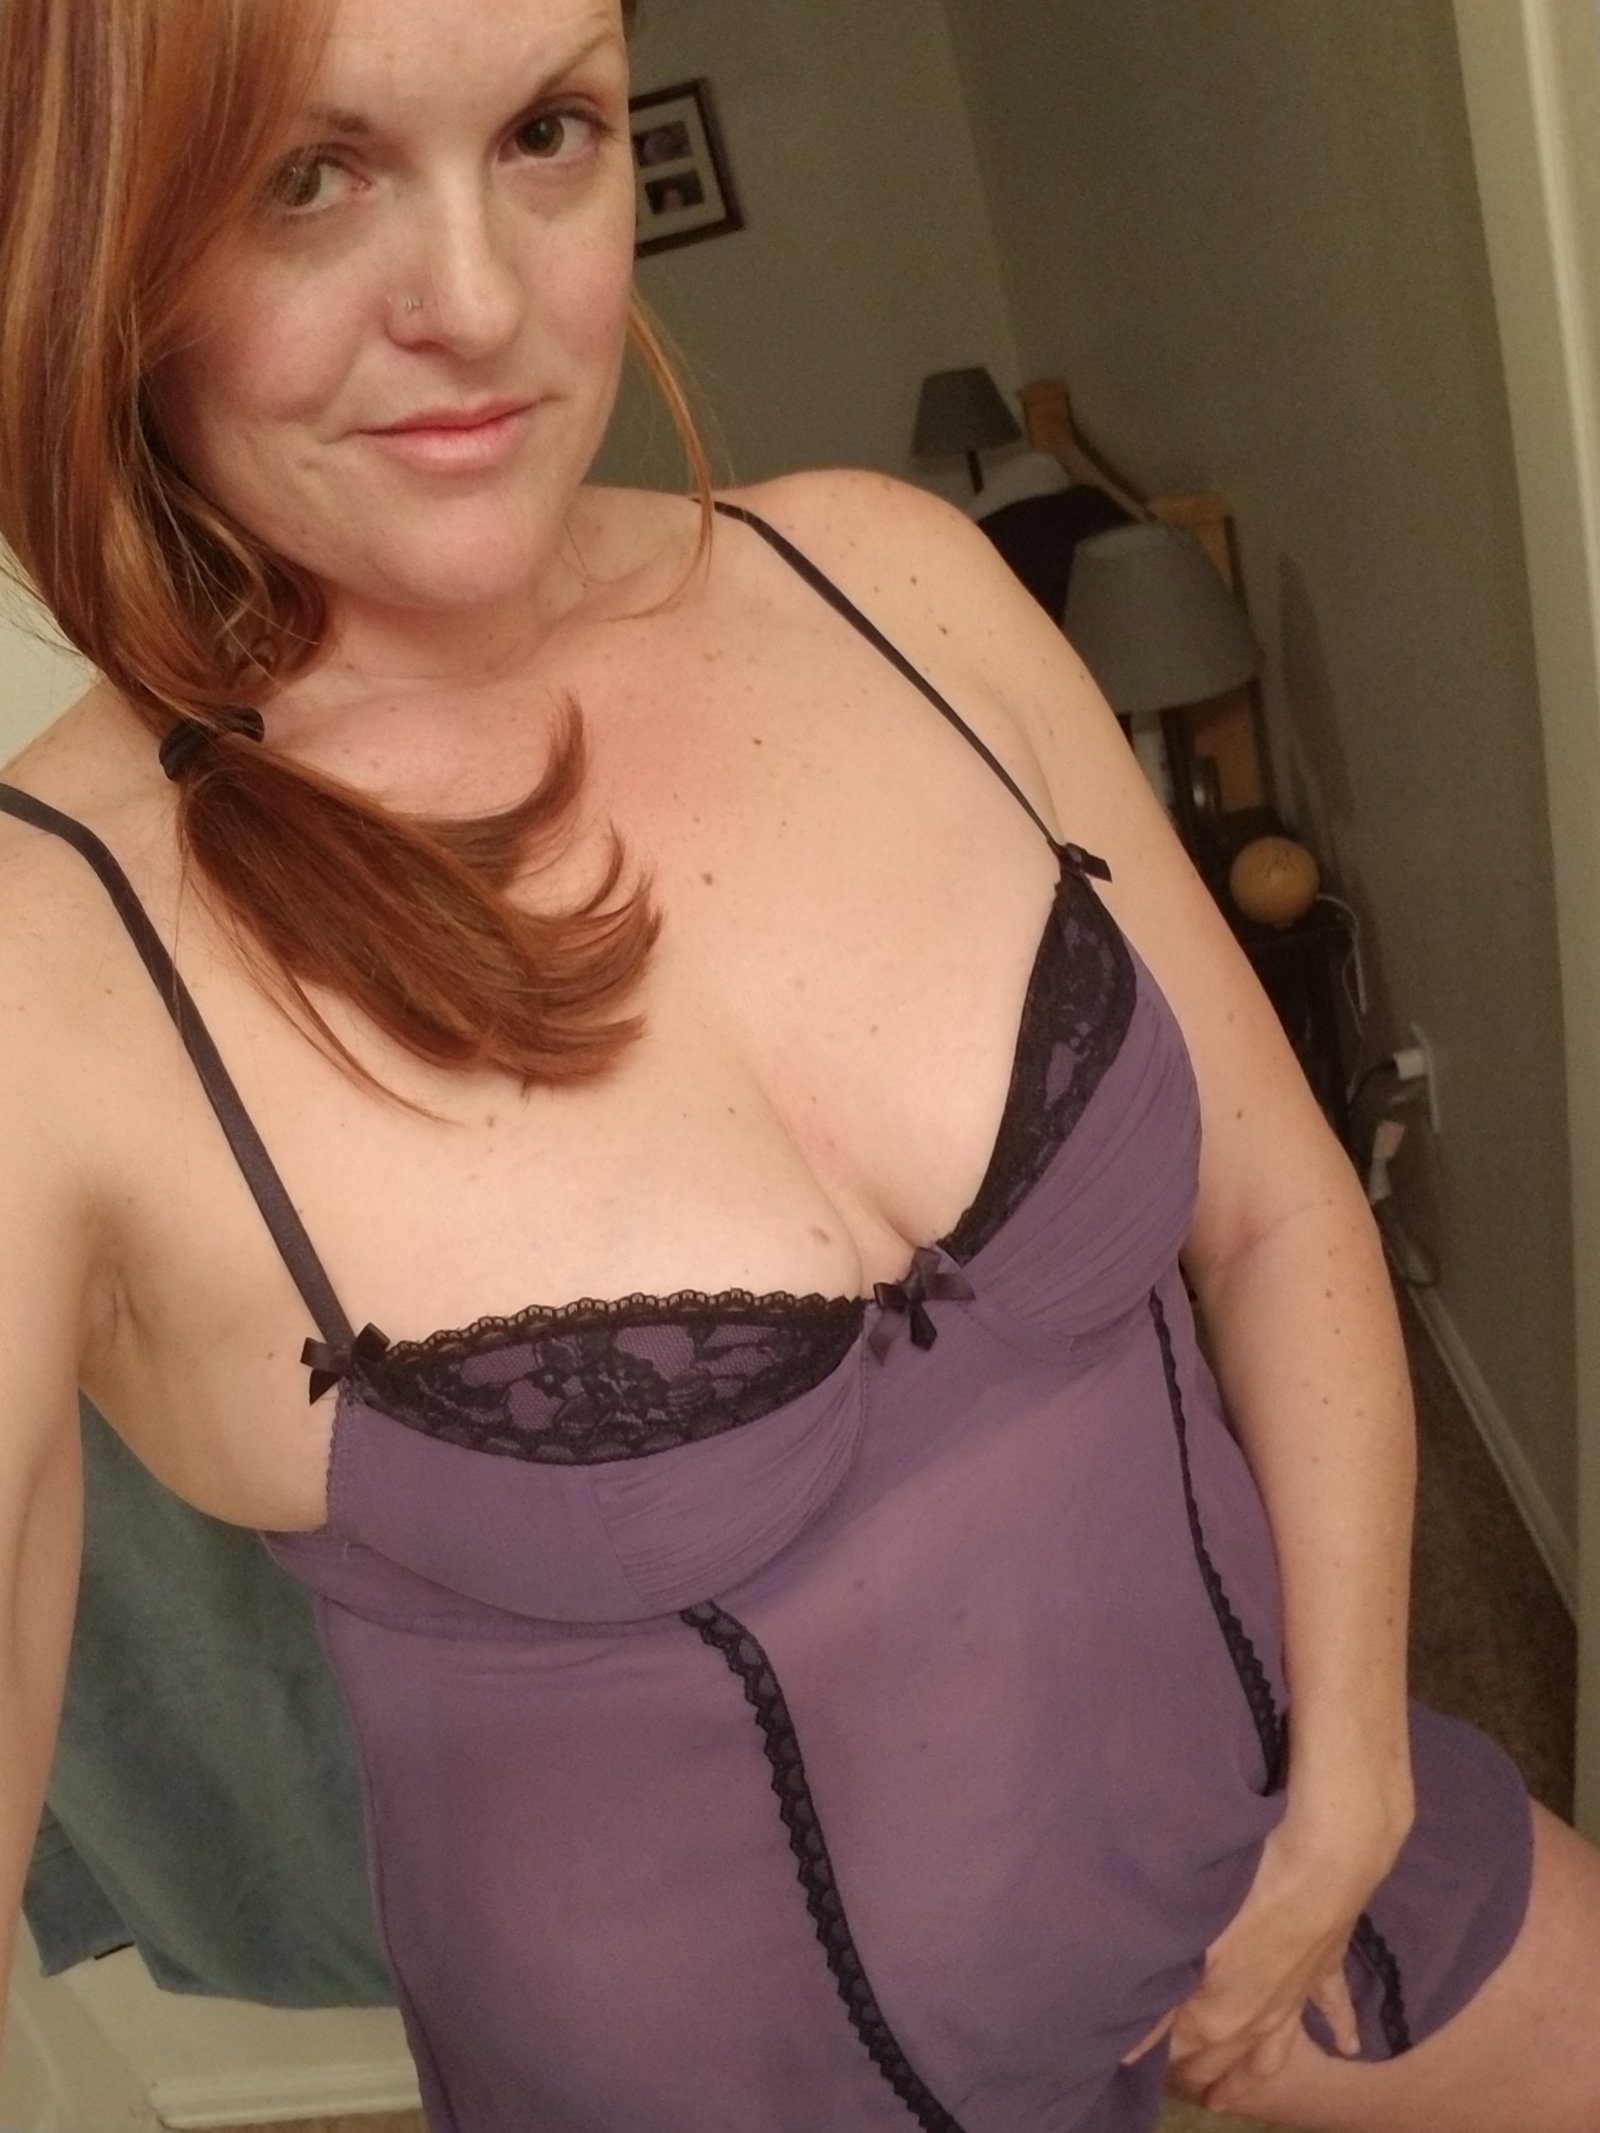 Photo by Swings for me with the username @Ofmadmic2121,  June 15, 2019 at 2:07 AM. The post is about the topic Tumblr refugees and the text says 'Love my lingerie..'